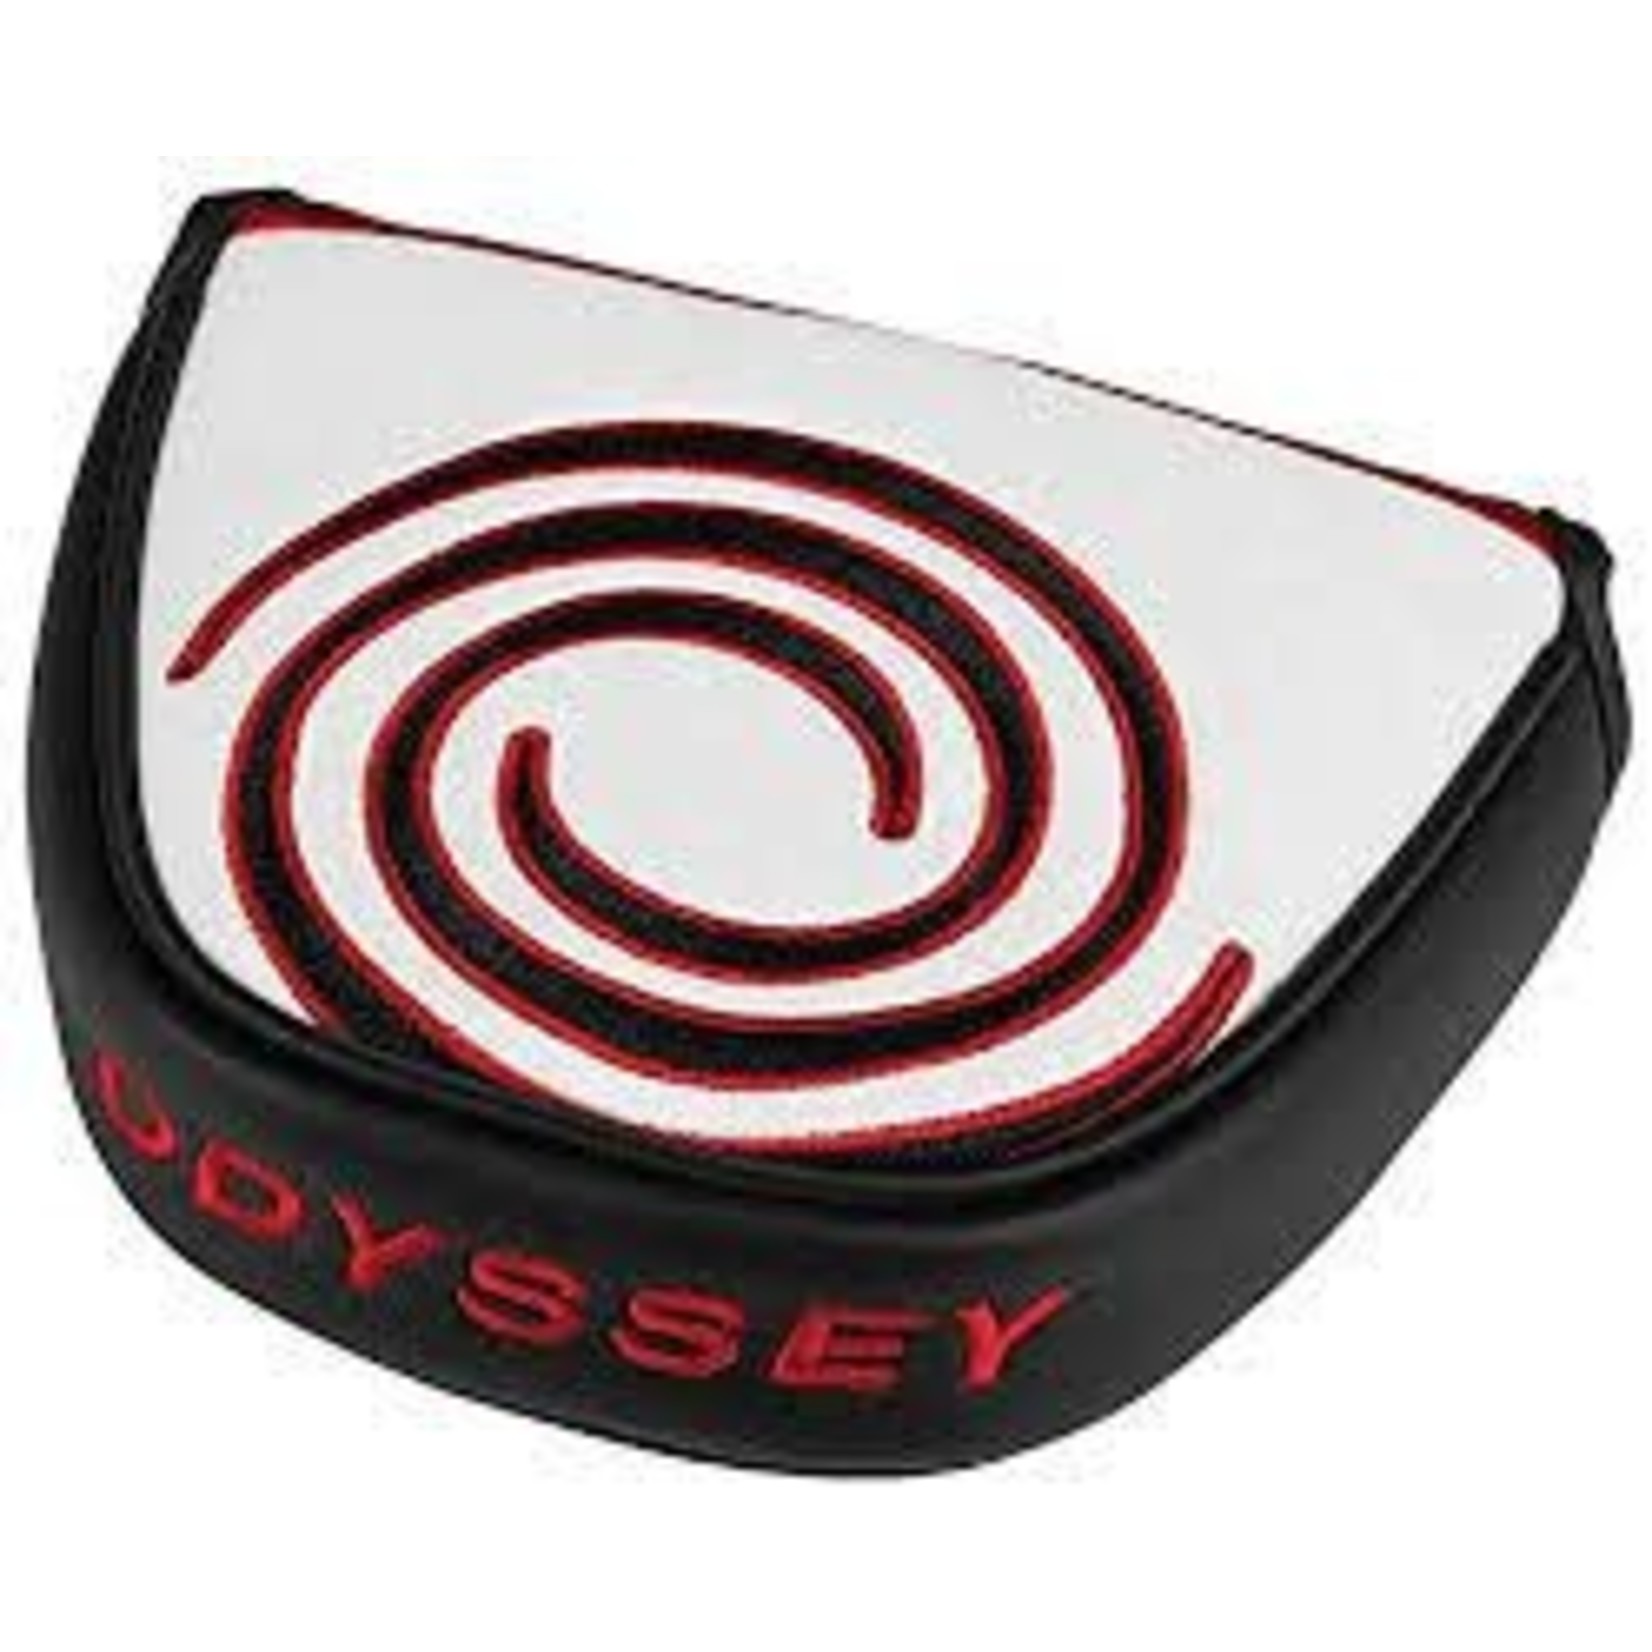 Callaway Odyssey Tempest Mallet Cover